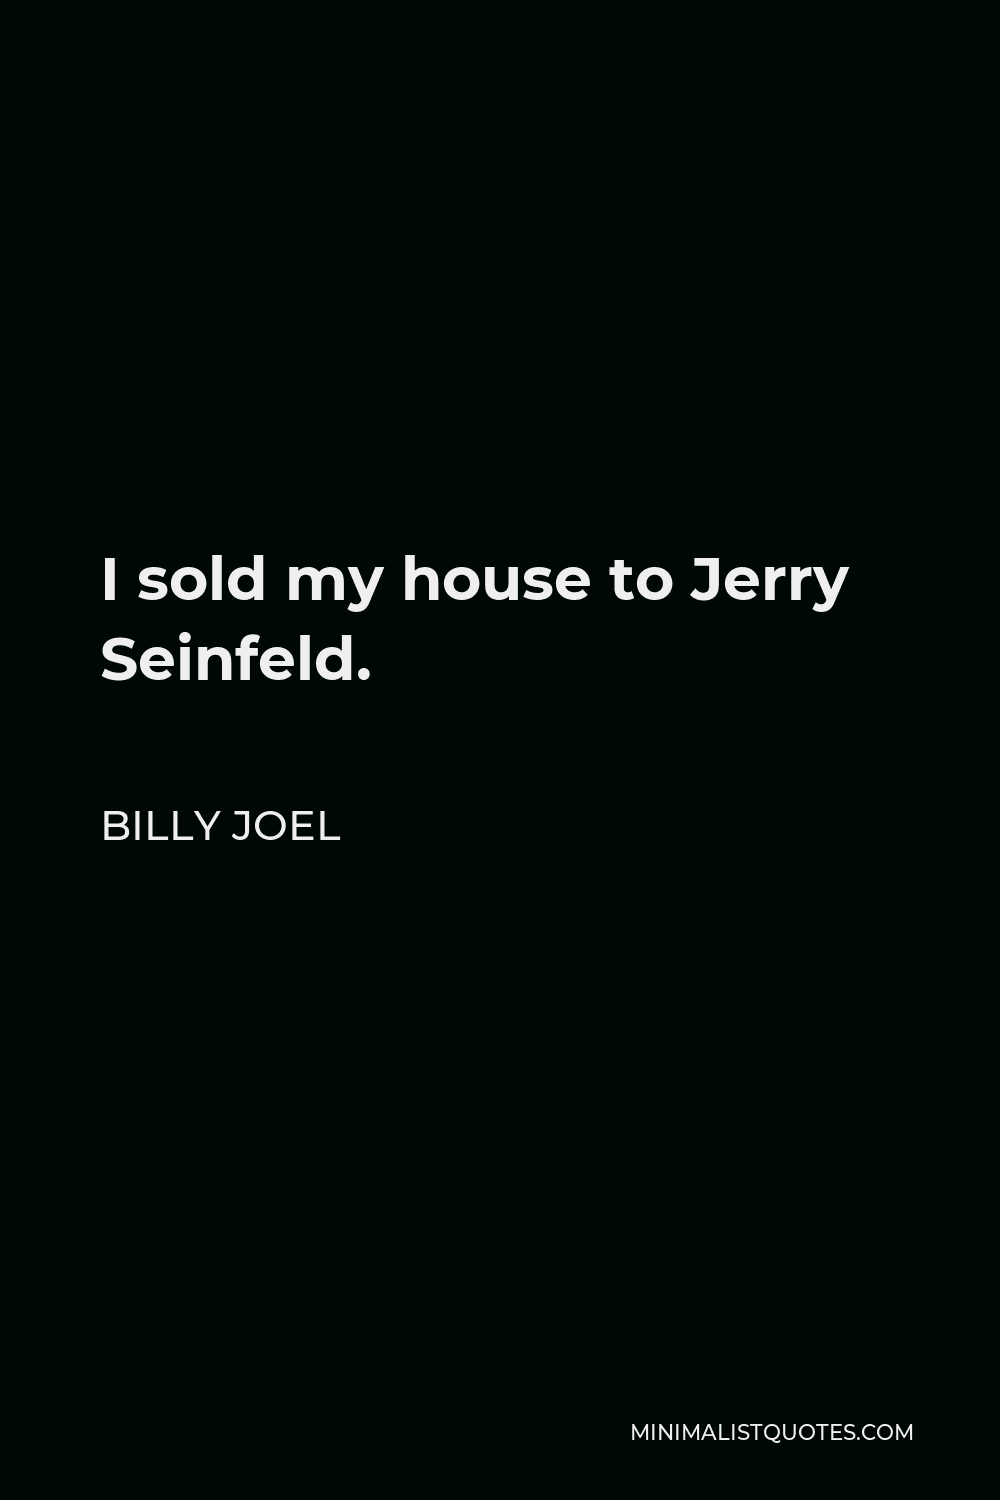 Billy Joel Quote - I sold my house to Jerry Seinfeld.